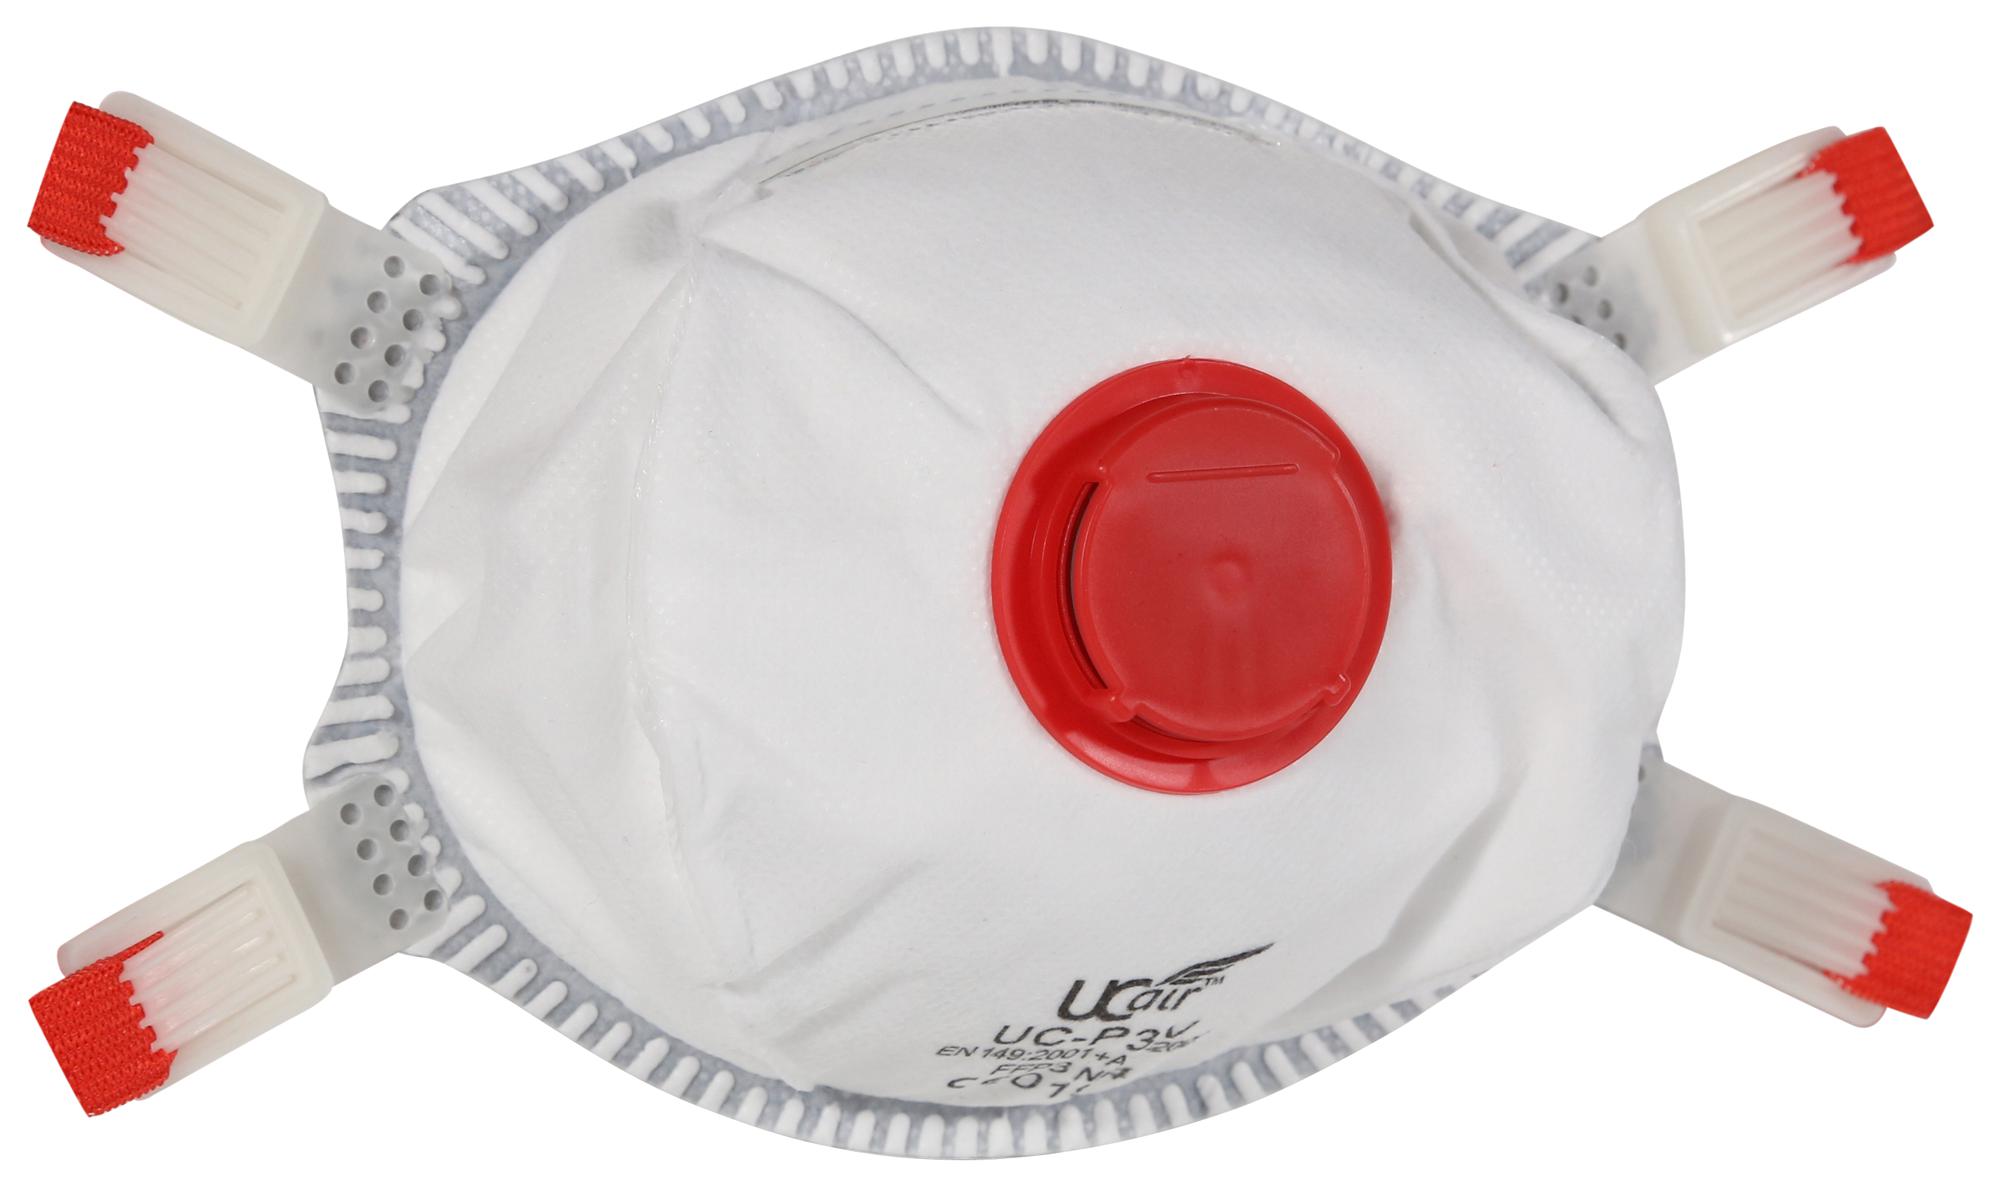 Uci Re/uc/ucfd-P3V Fold Flat Mask, Valved, Disposable